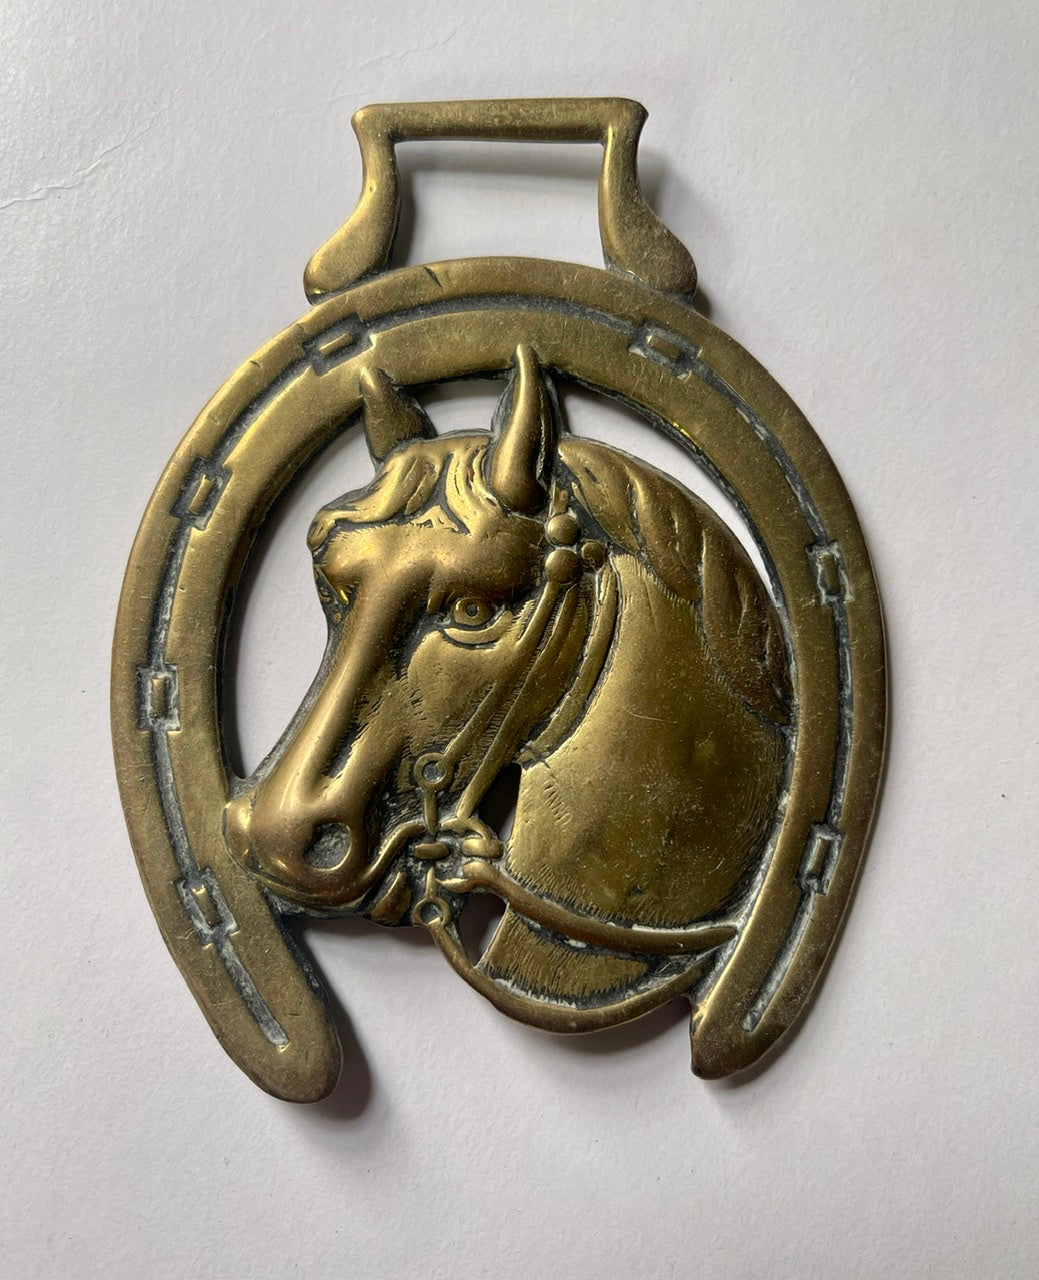 Vintage / Antique Brass Horse Head🐴 Harness Medallion - Nancy's Daily Dish